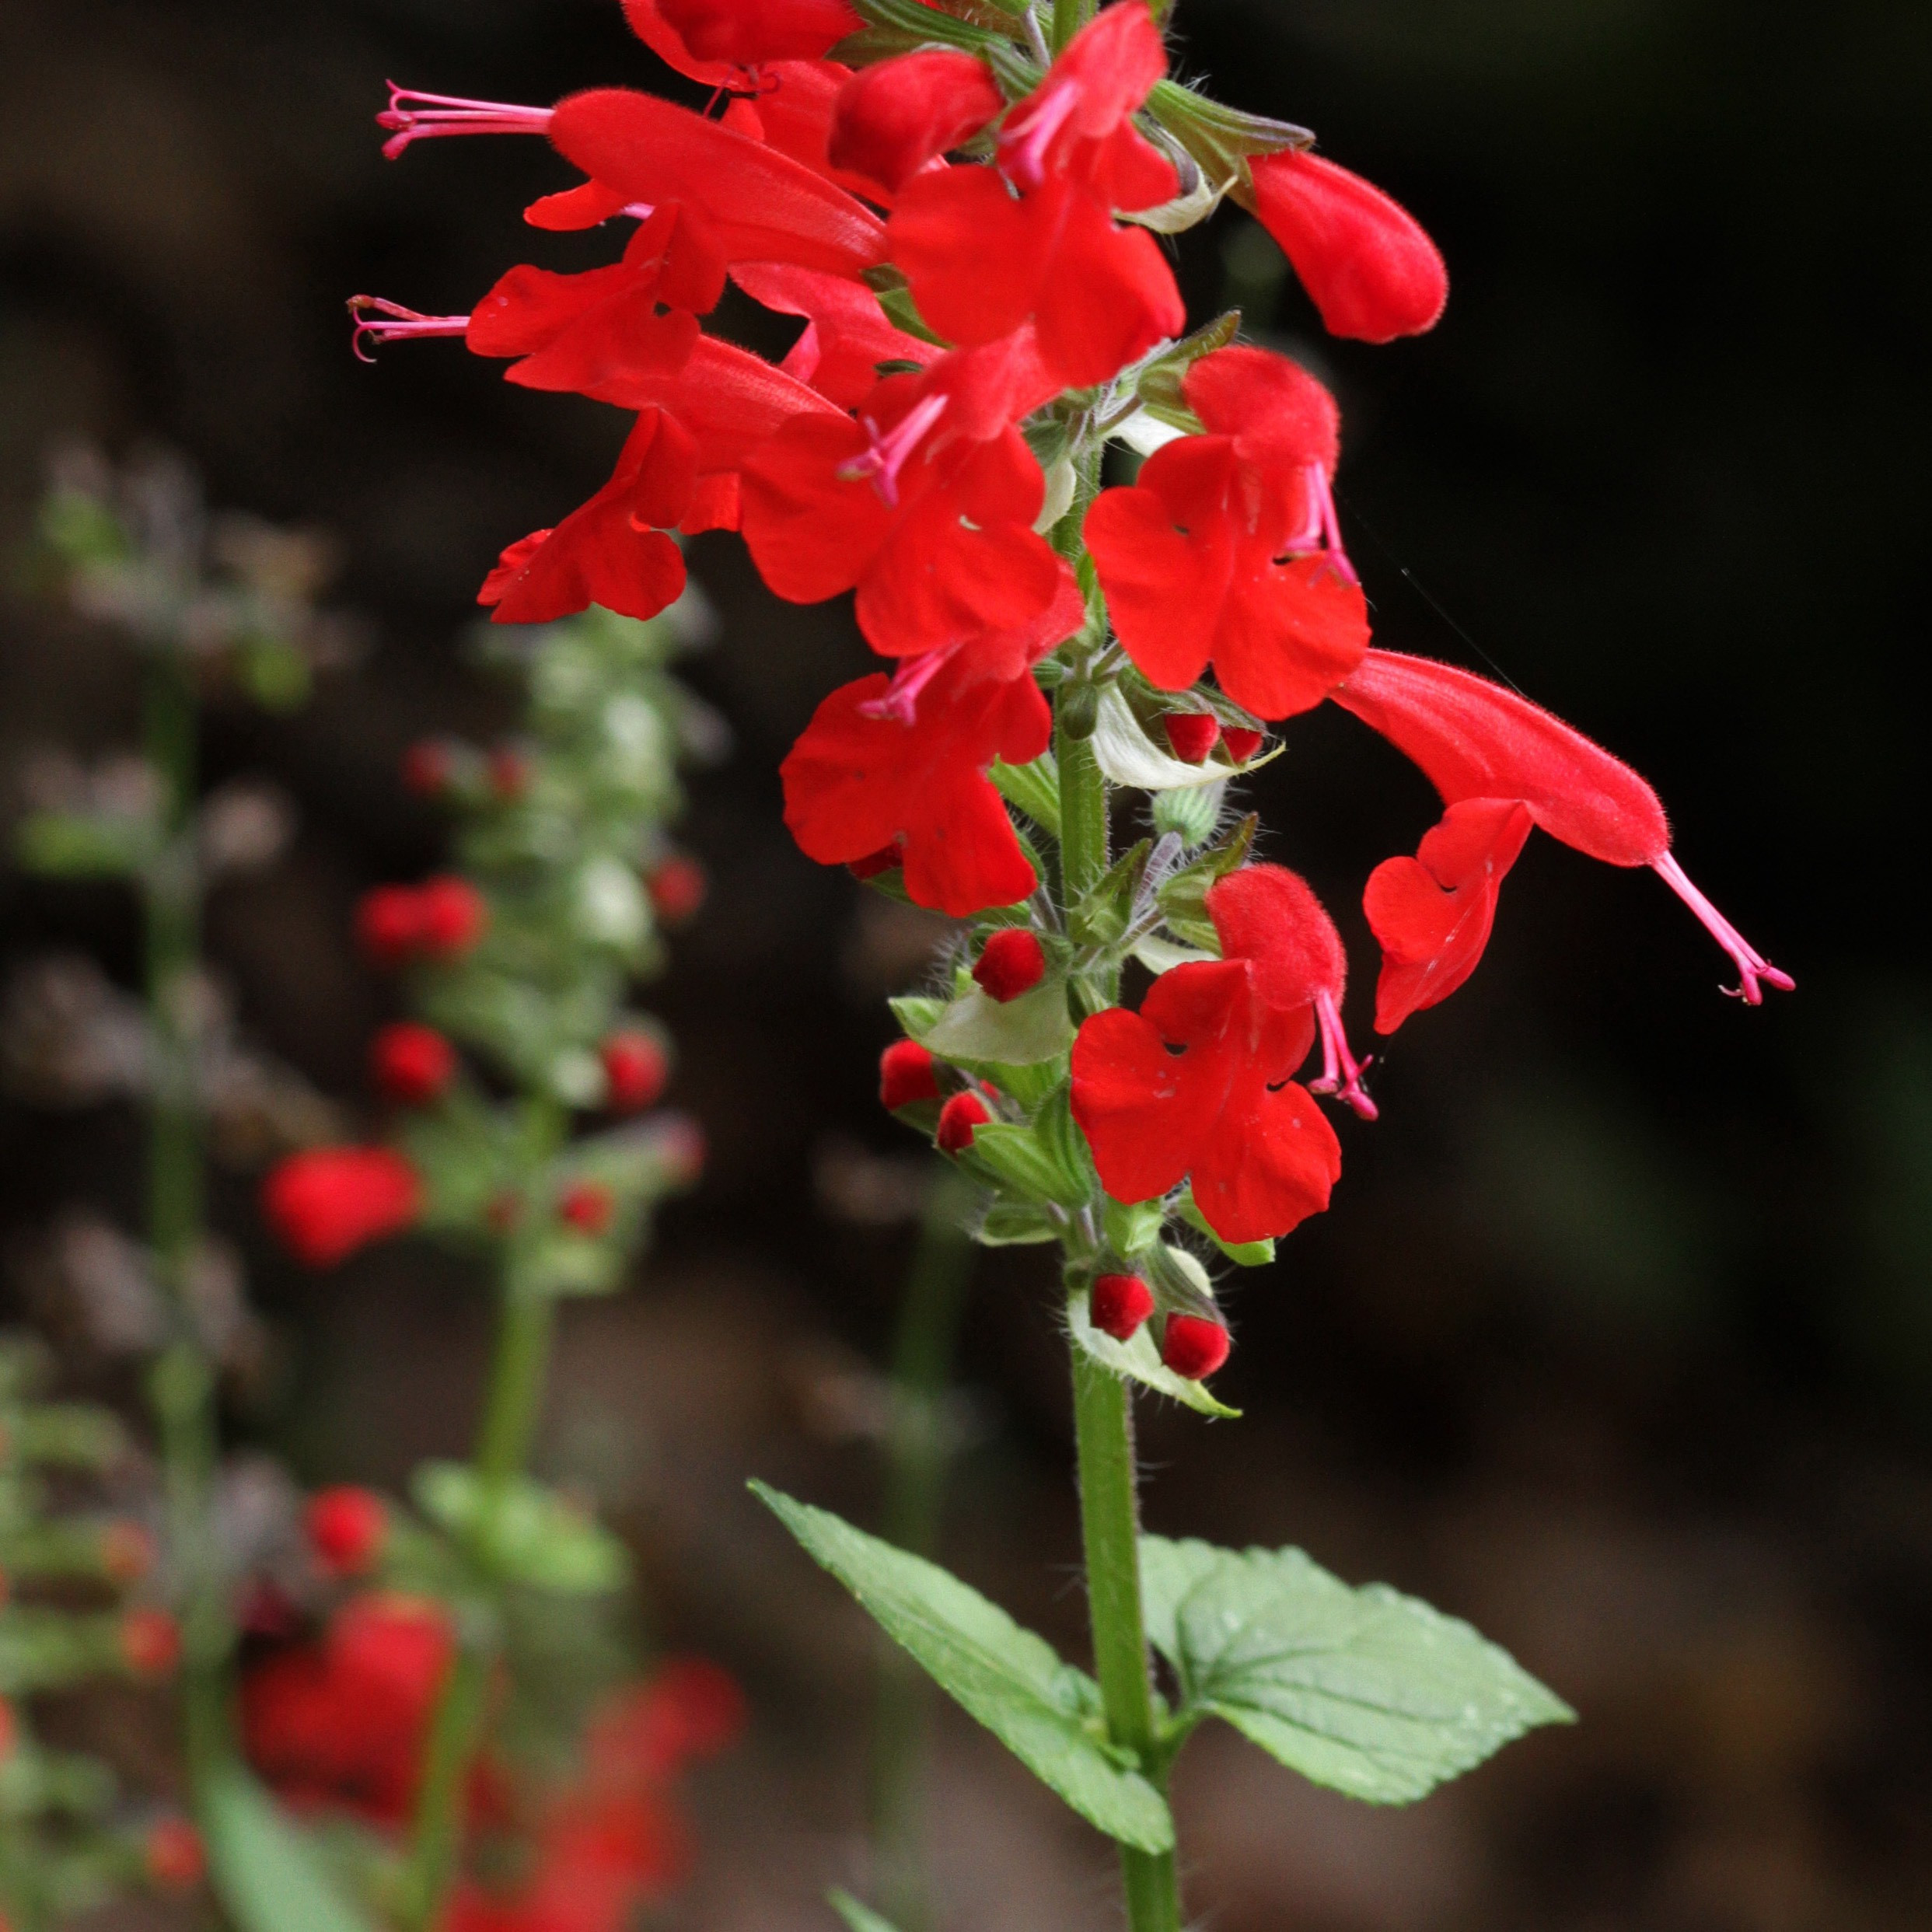 The Scientific Name is Salvia coccinea. You will likely hear them called Scarlet Sage, Blood Sage, Tropical Sage. This picture shows the Leaves are opposite, triangular, and toothed on short petioles from densely hair stems. of Salvia coccinea